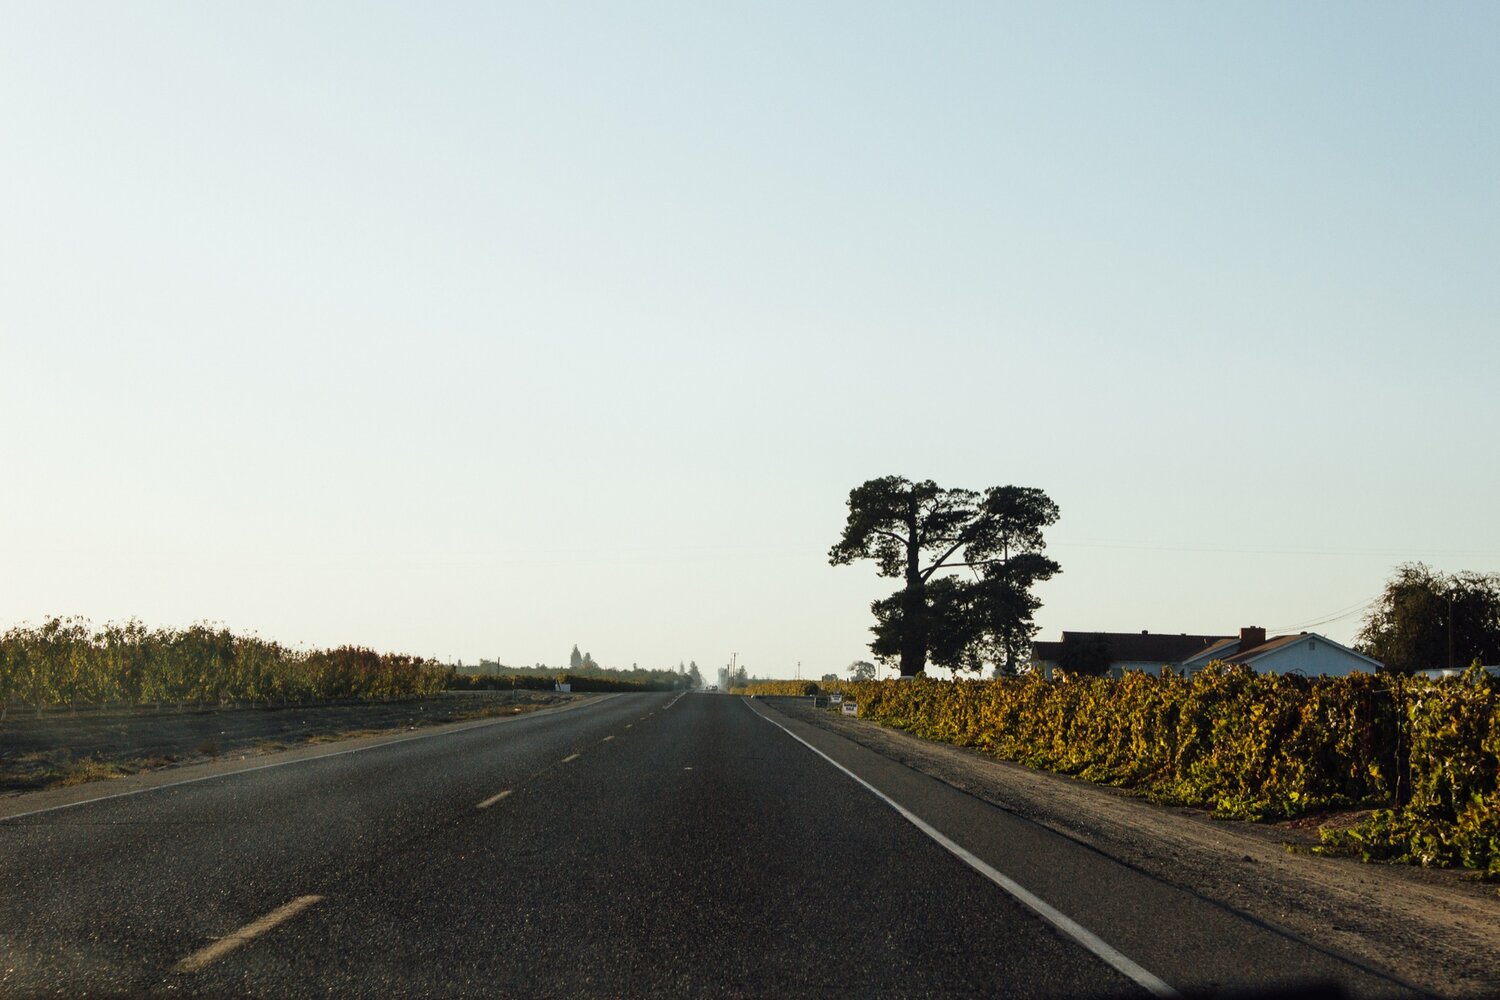 A country road in Fresno, California.